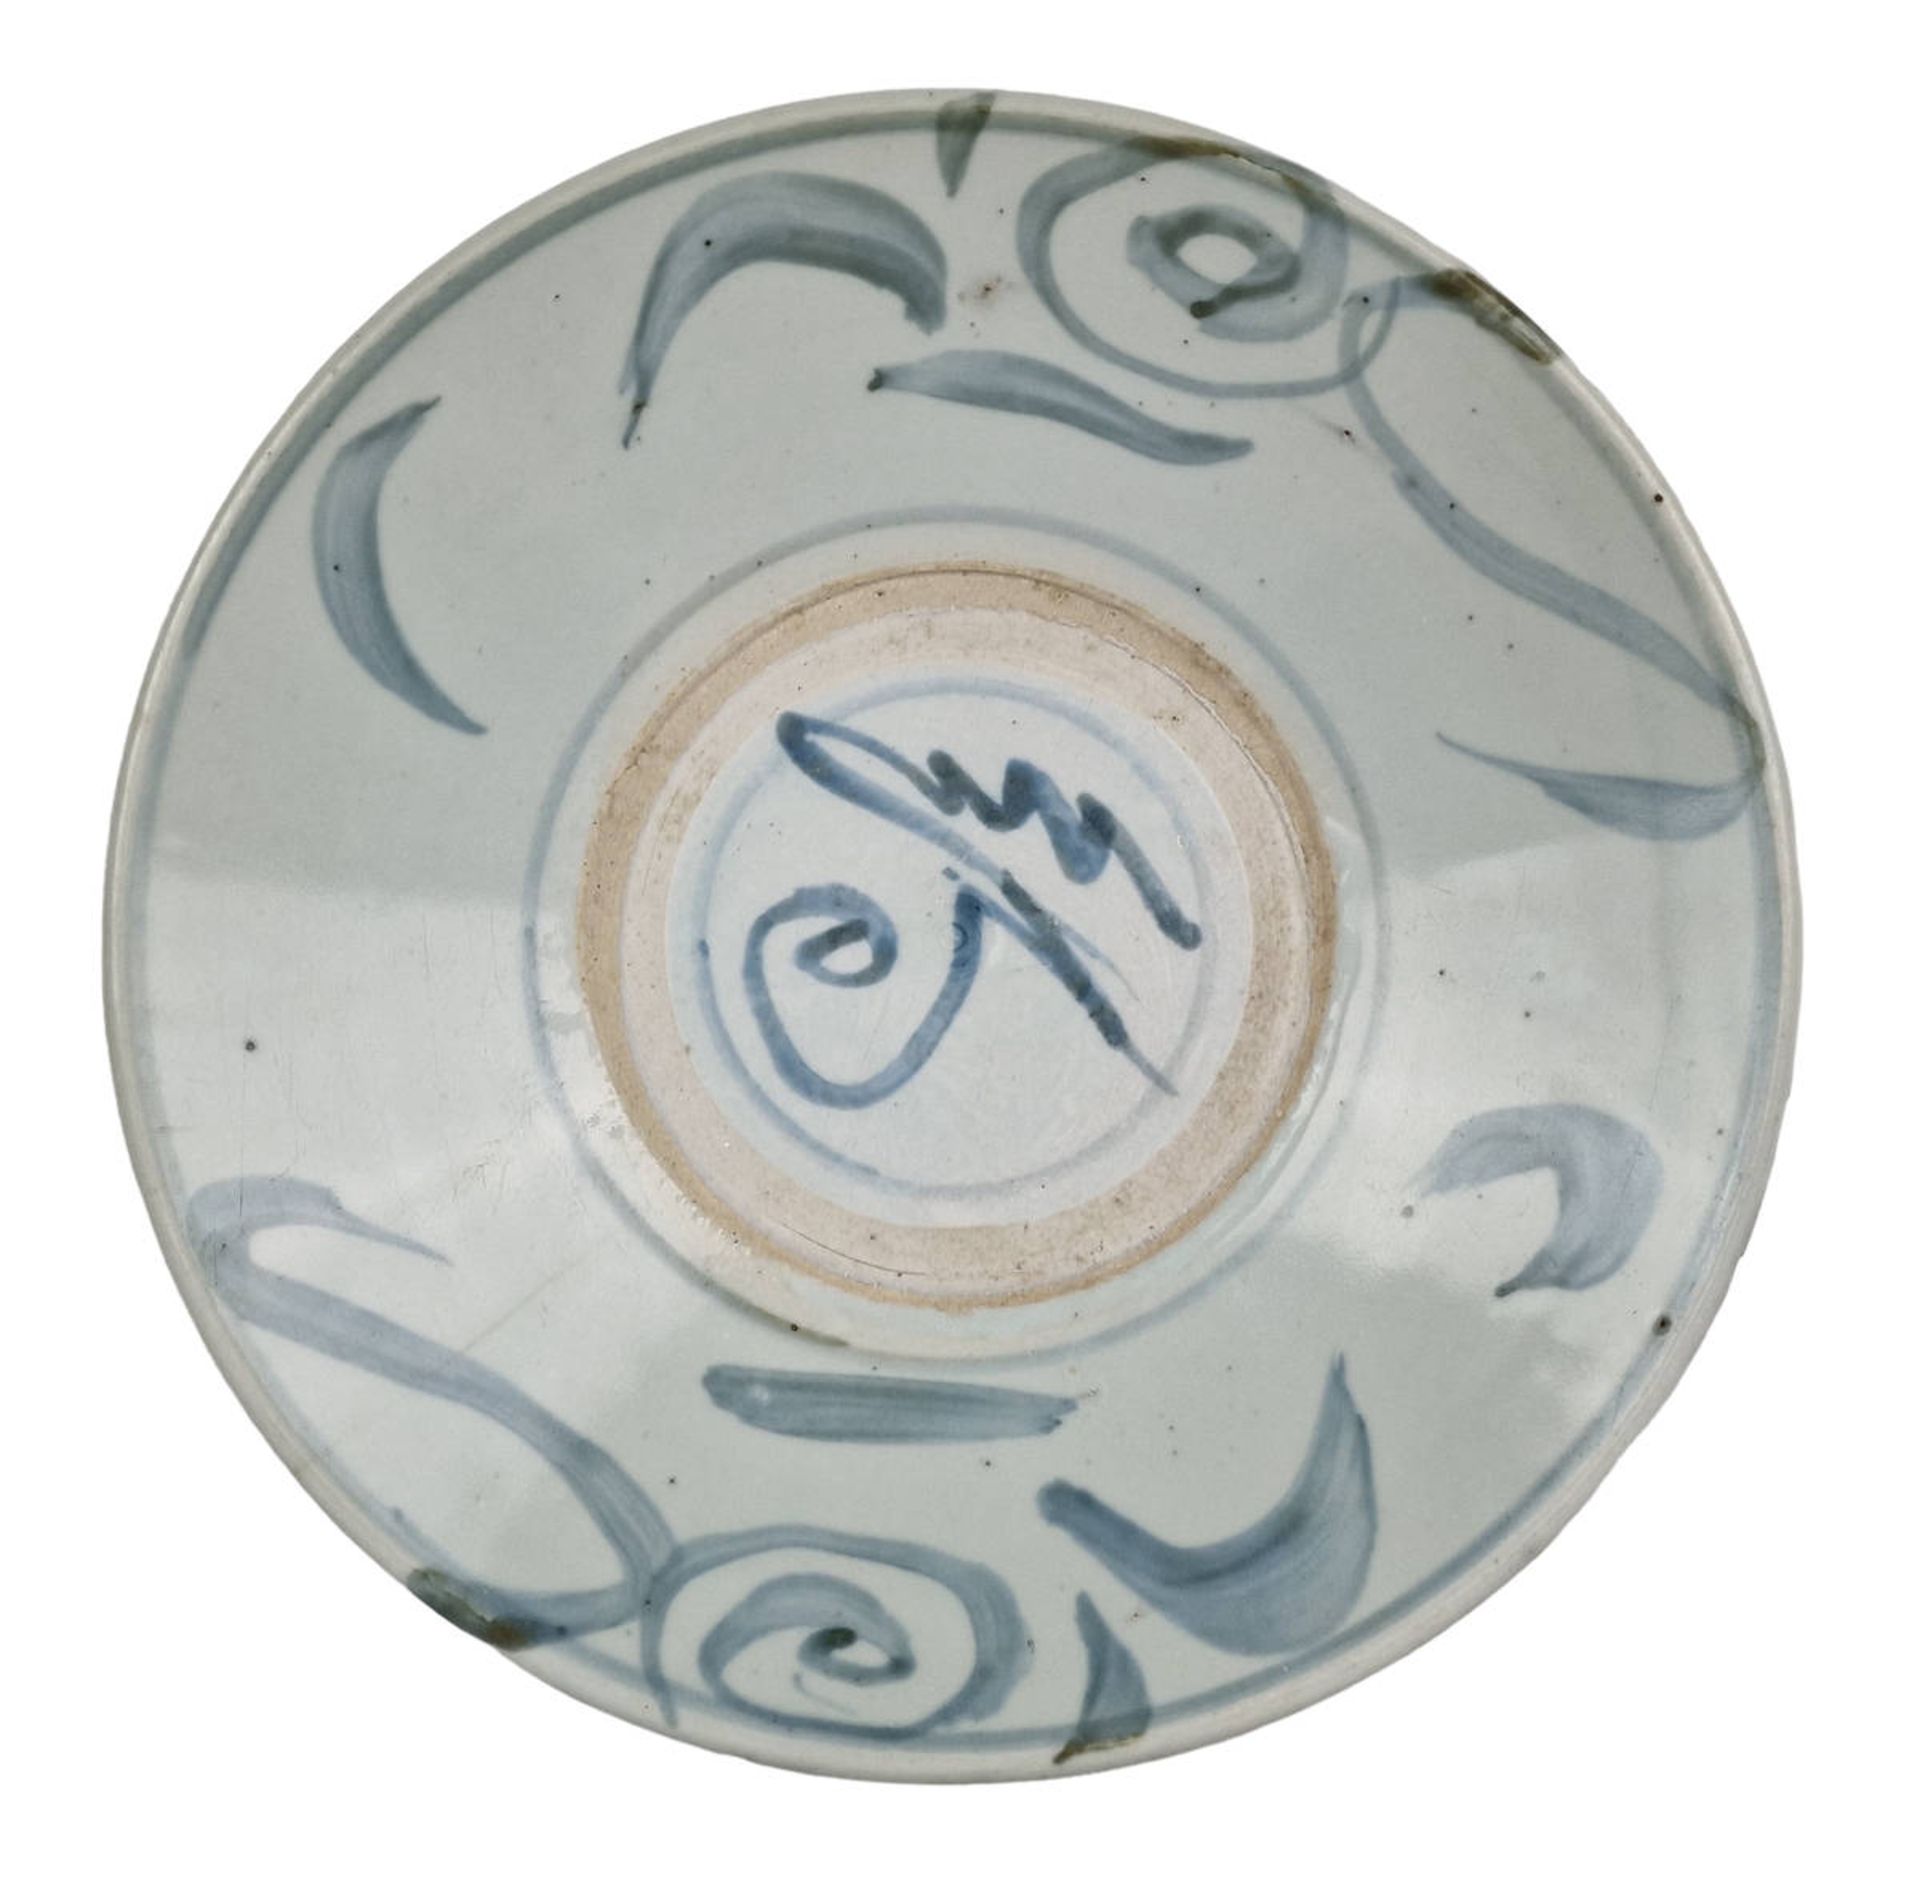 MING SWATOW PORCELAINE, CHINE